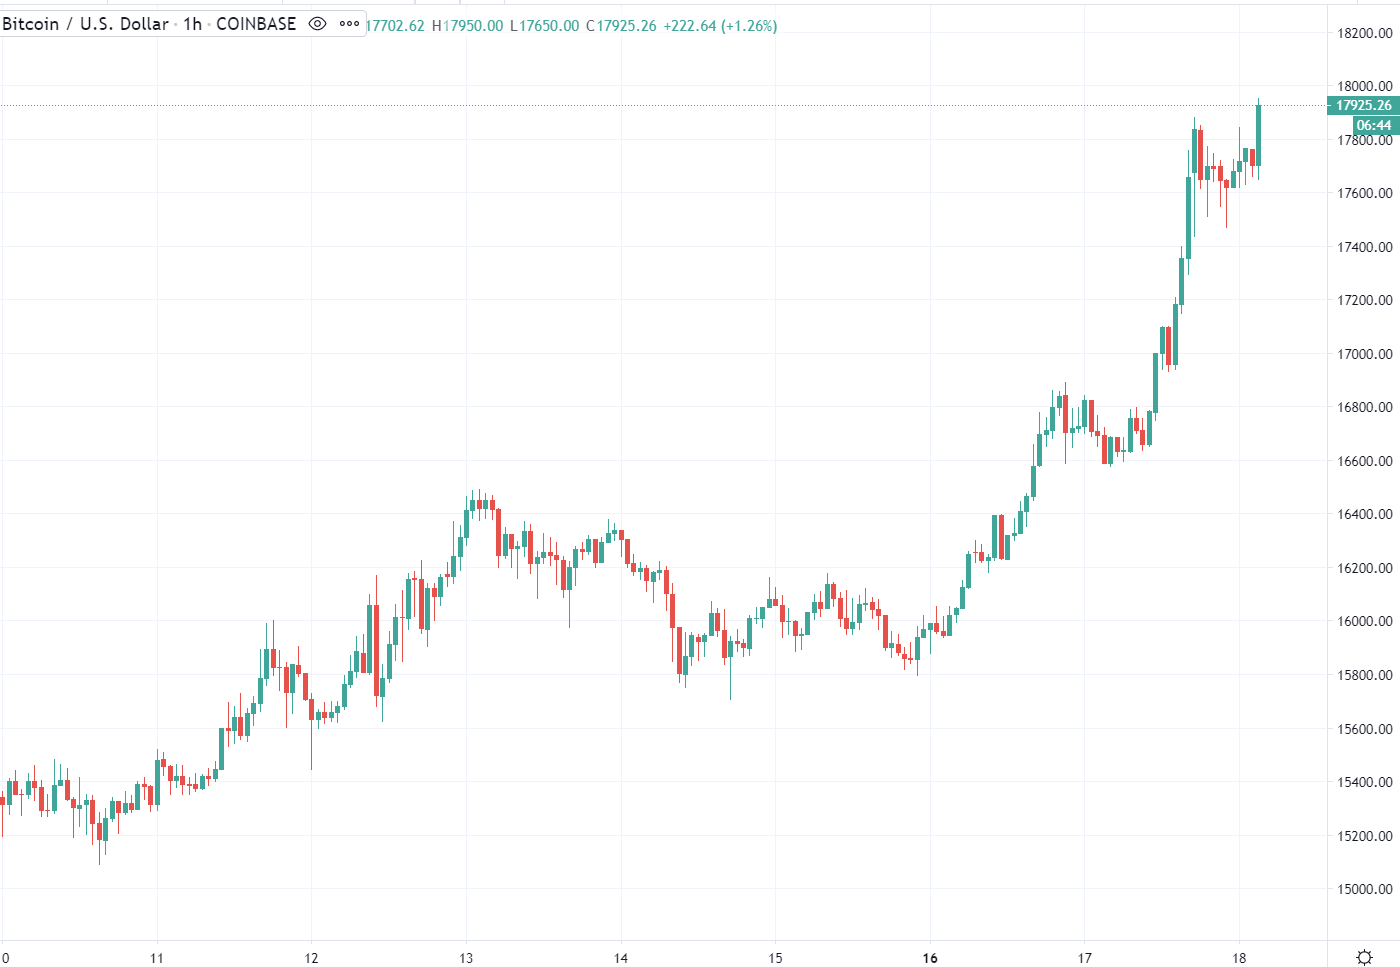 BTC about to hit another  milestone on its path higher (for this uptrend that is) 